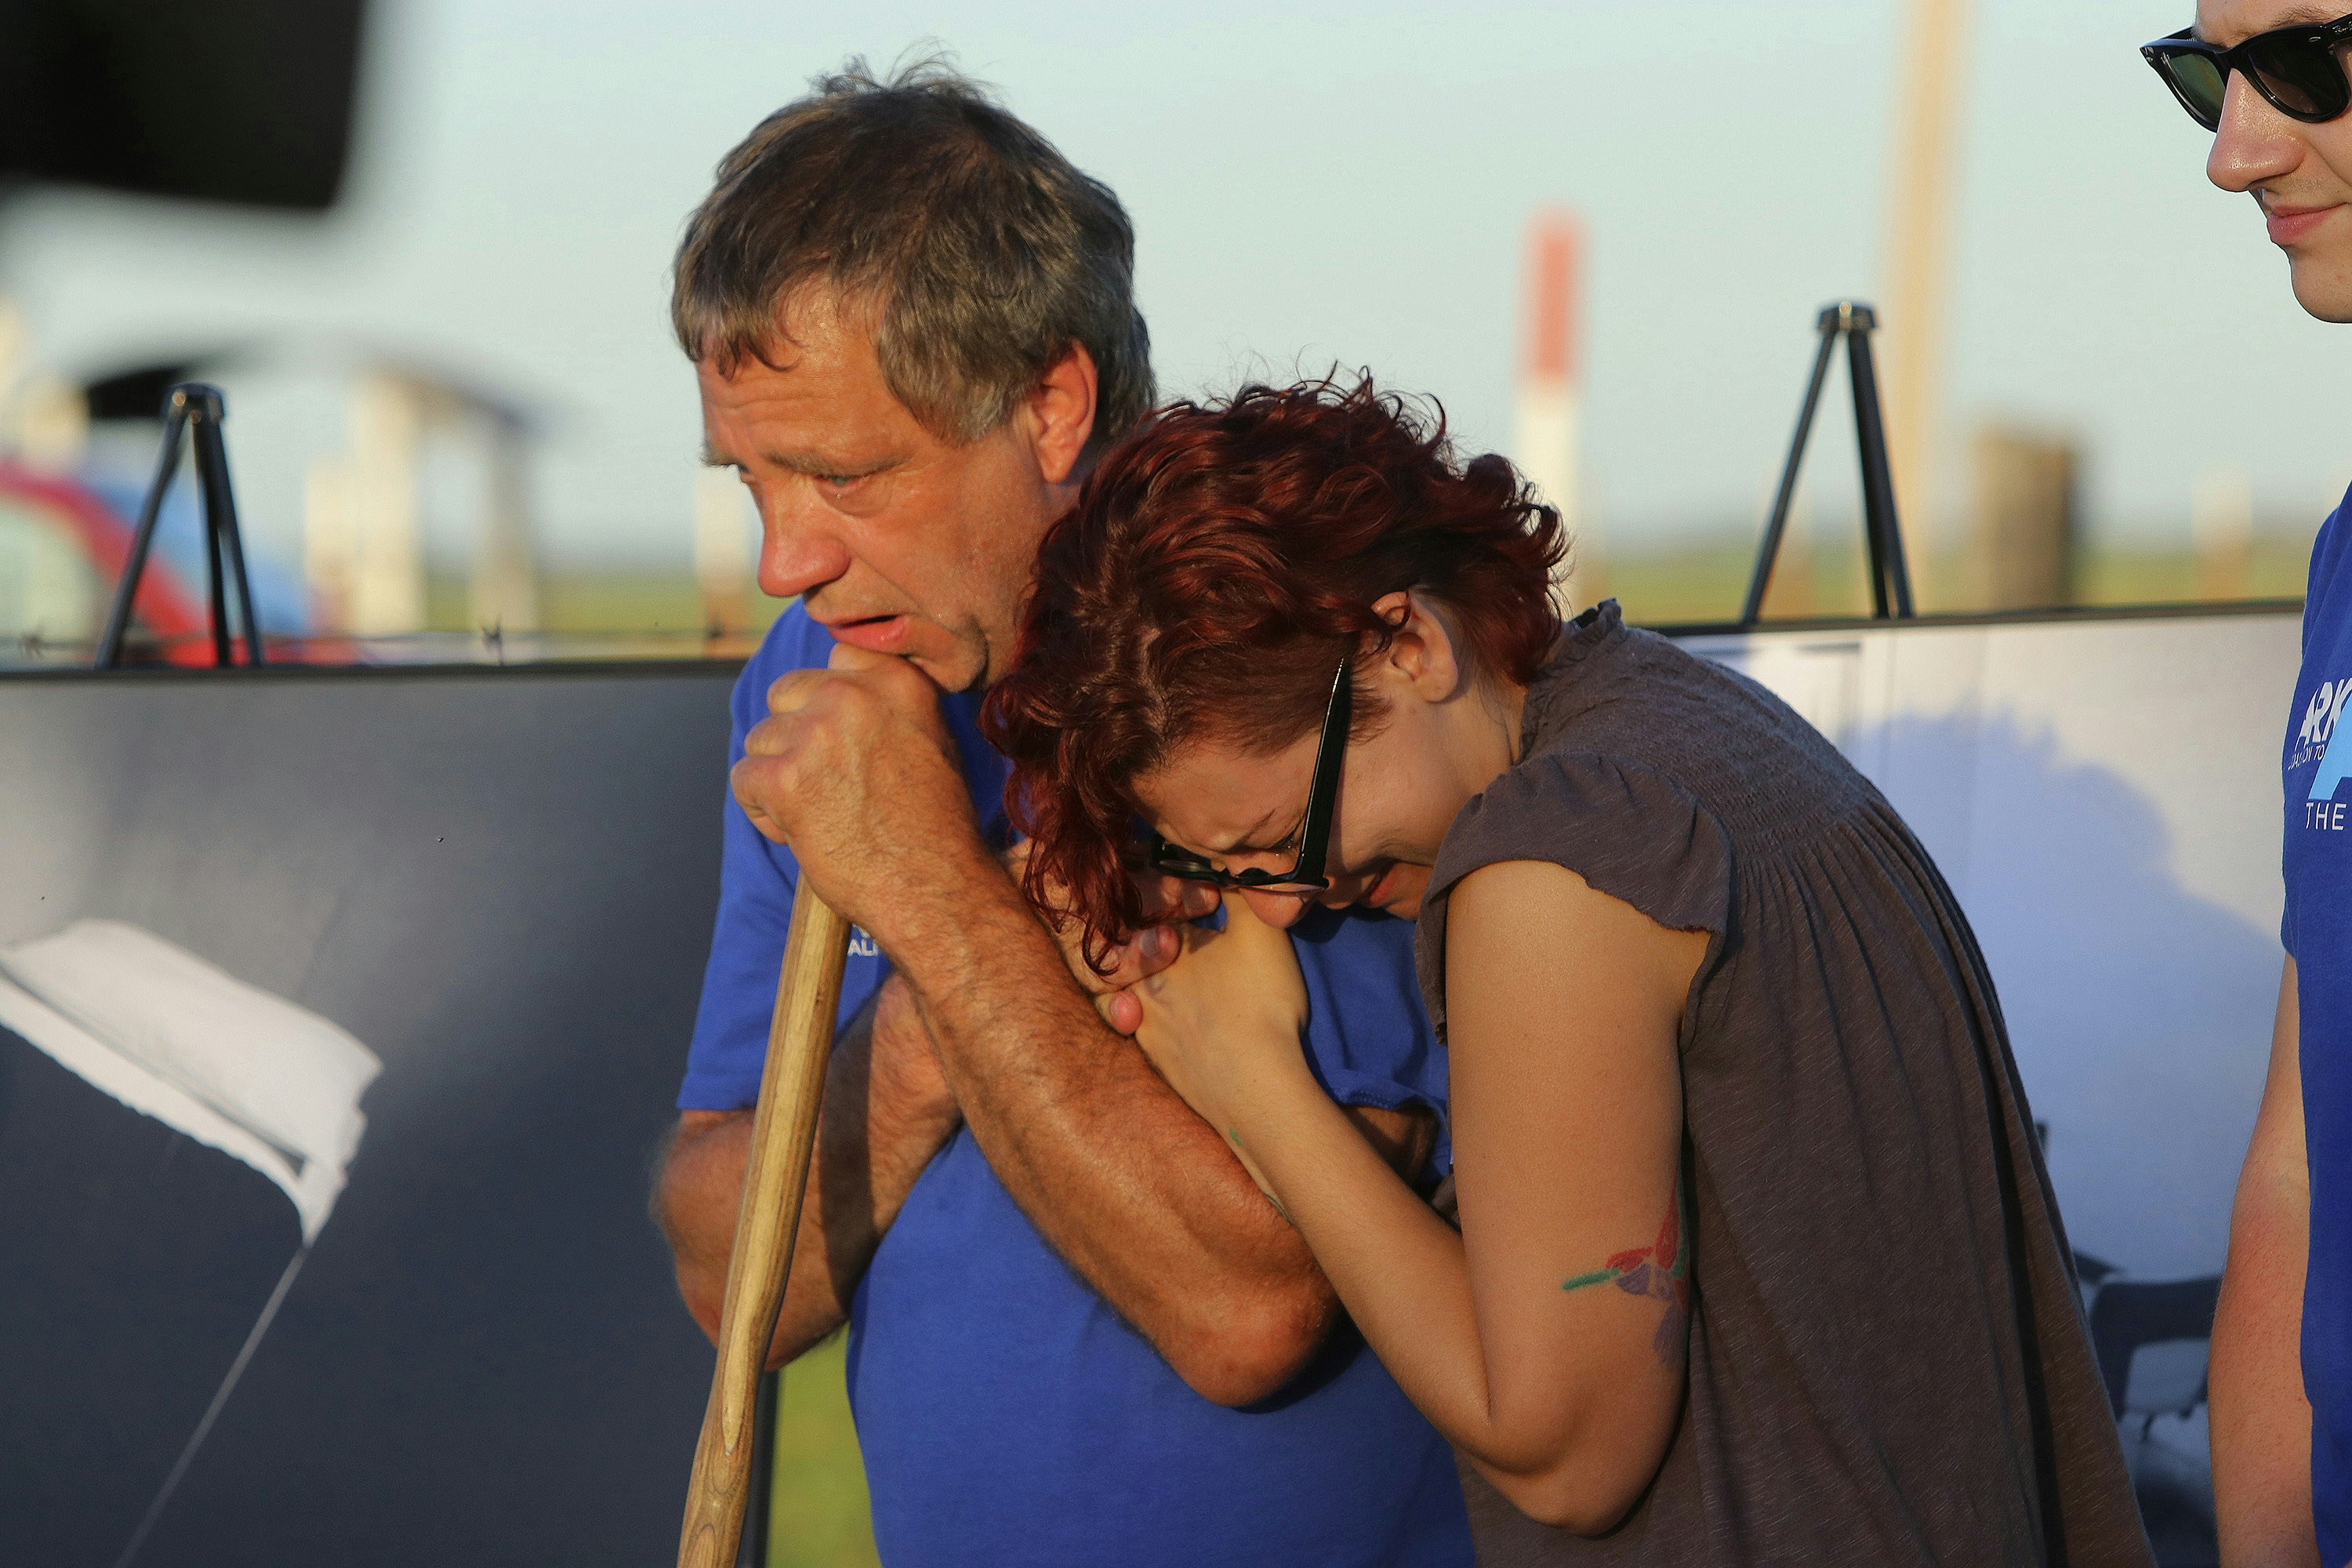 Anti-death penalty supporter Randy Gardner, left, embraces Gina Grimm, daughter of inmate Jack Jones, outside the Varner Unit on Monday, April 24, 2017 near Varner, Ark.    Jack Jones and Marcel Williams received lethal injections on the same gurney Monday night, just about three hours apart. It was the first double execution in the United States since 2000.   (Stephen B. Thornton/The Arkansas Democrat-Gazette via AP)